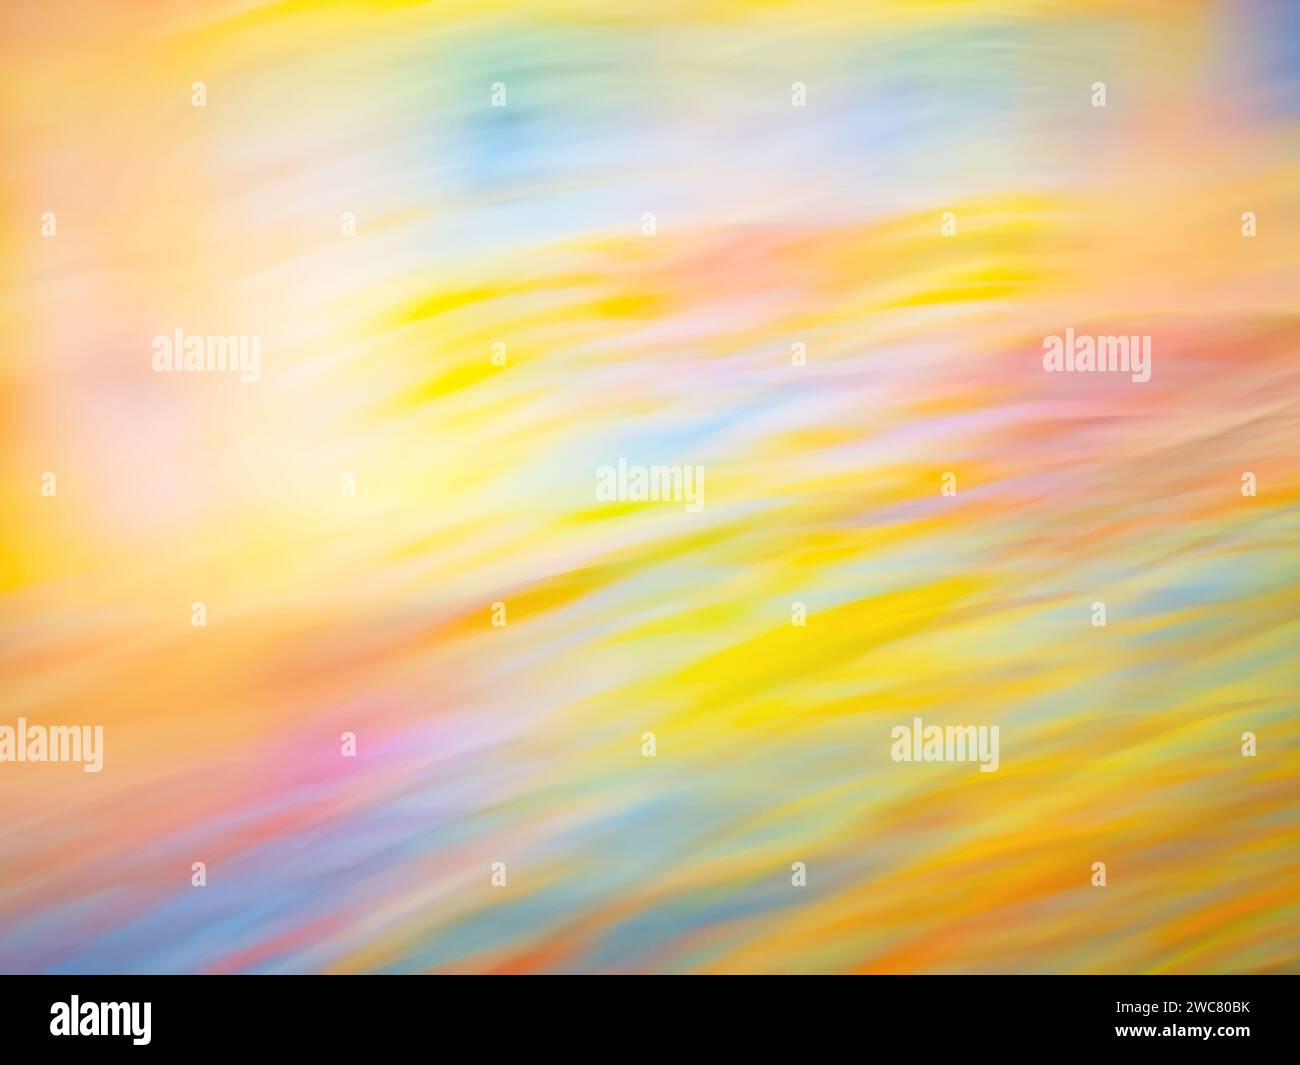 Abstract blur creative original background as a concept of happiness. Happiness abstract blurred shine lights background. Stock Photo